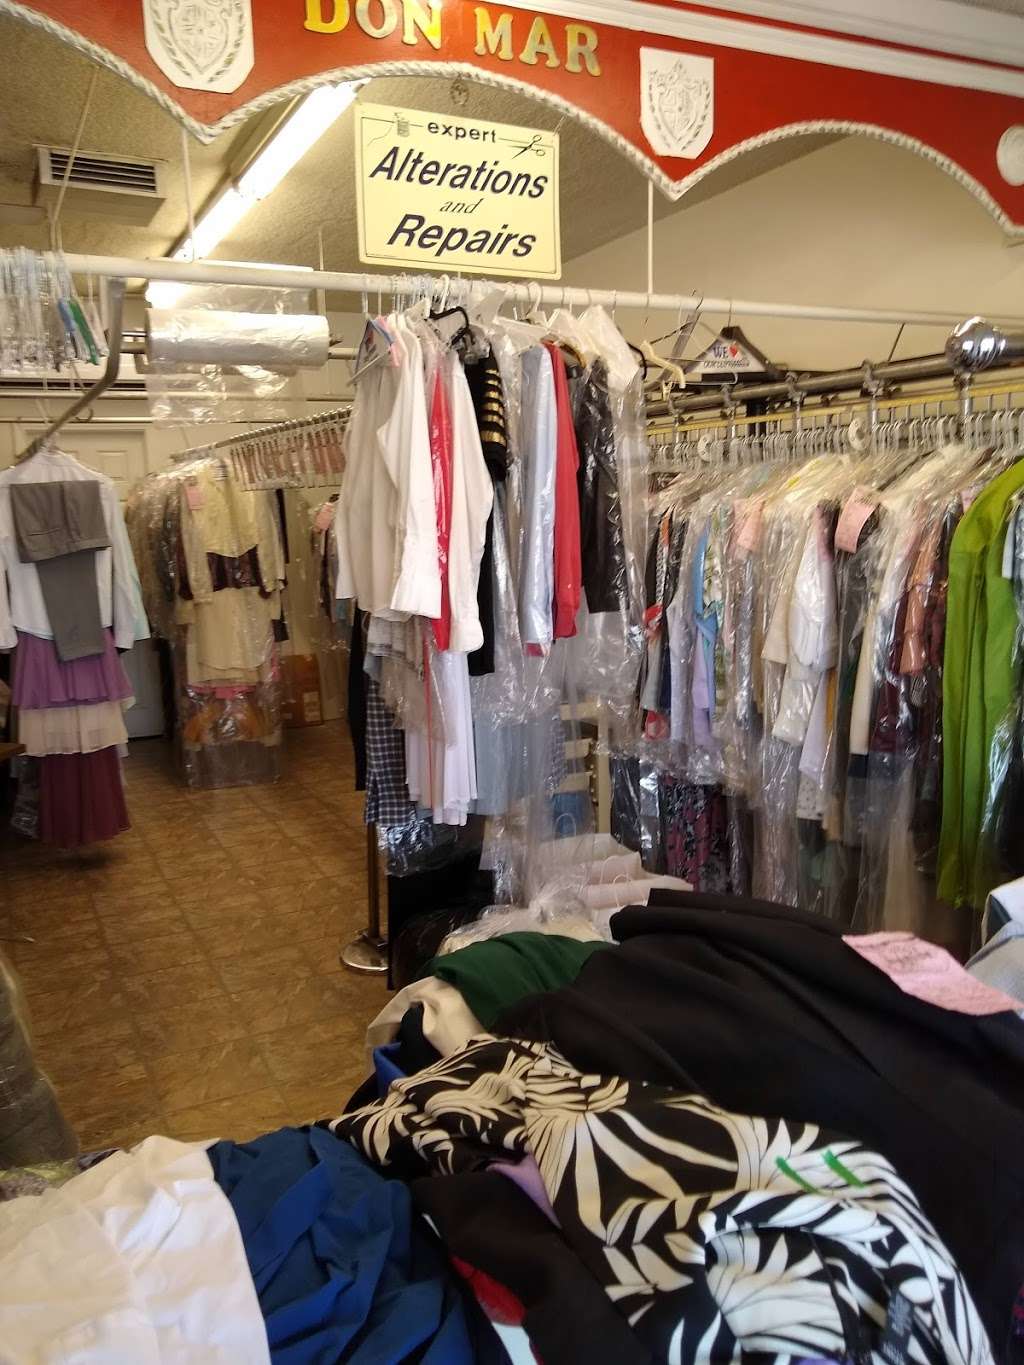 Don Mar Cleaners | 11514 Burbank Blvd, North Hollywood, CA 91601, USA | Phone: (818) 980-3733